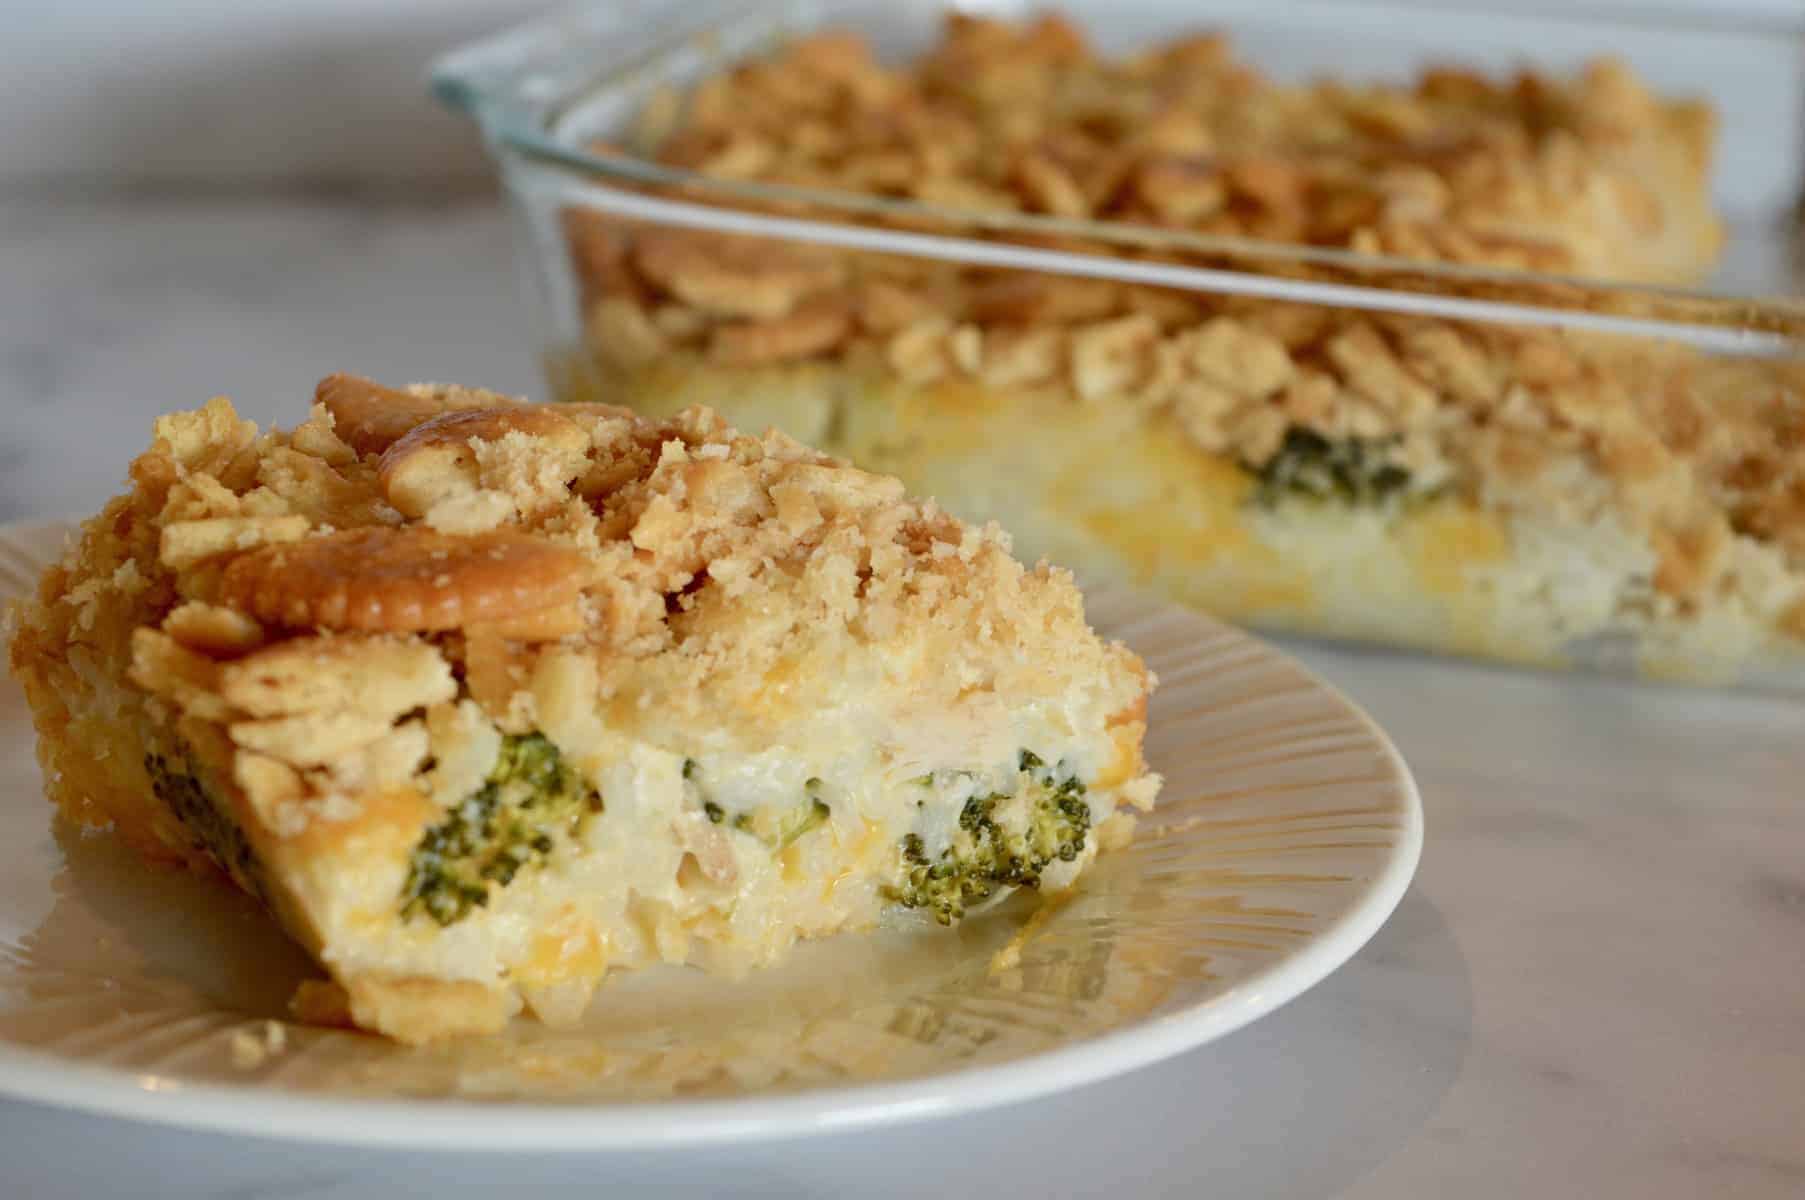 Ritz Cracker Casserole with Broccoli and Cheese